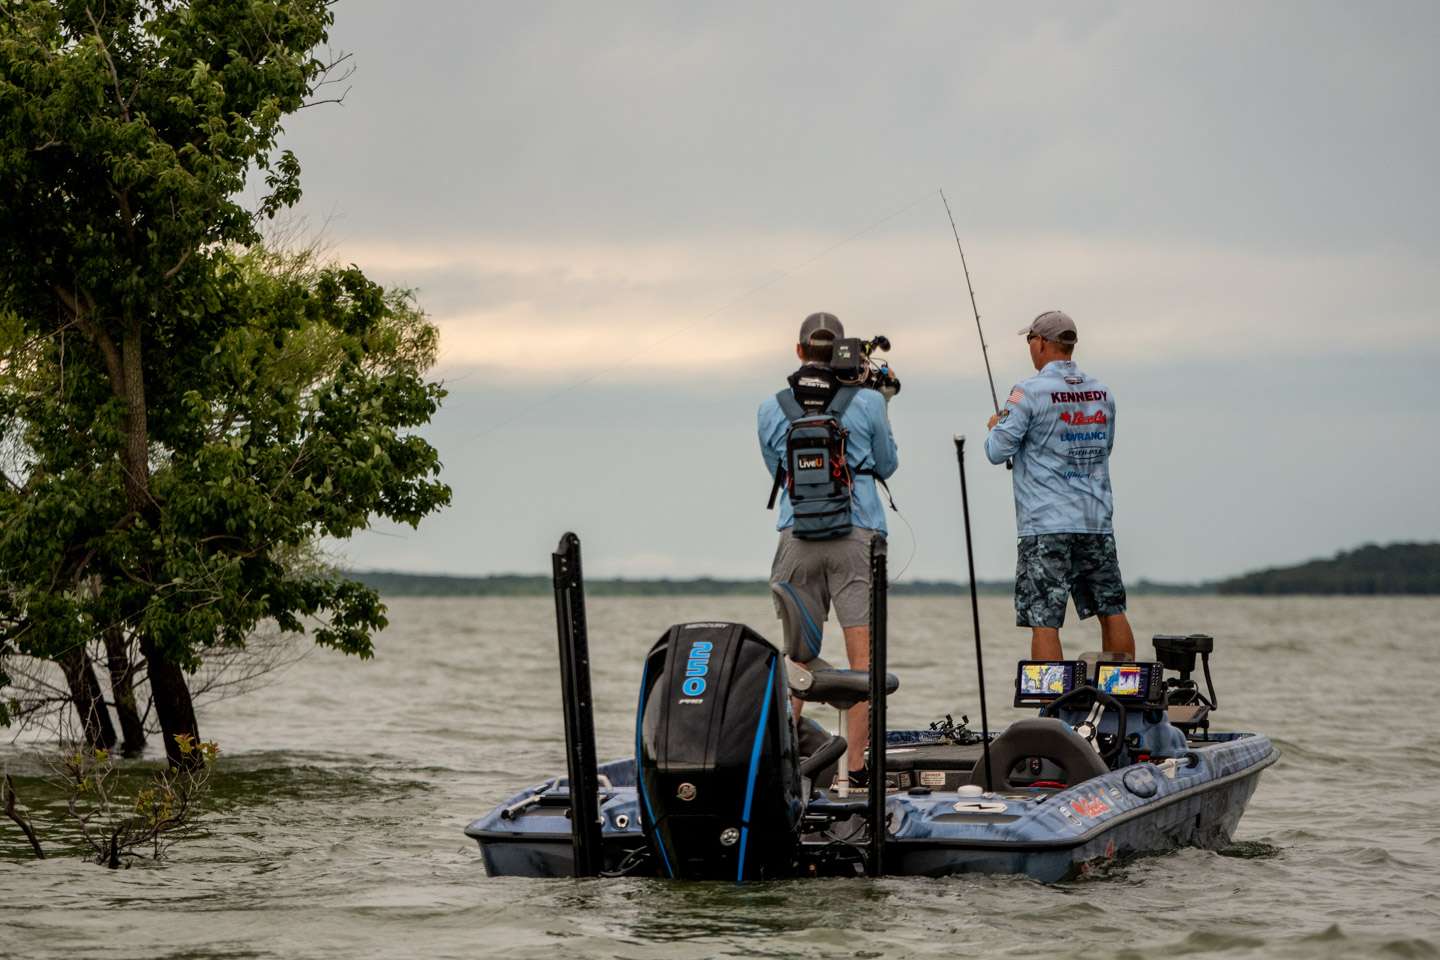 Steve Kennedy and Justin Kerr are keeping the faith as they battle to make the cut on Day 2 of the 2021 Academy Sports + Outdoors Bassmaster Classic presented by Huk!